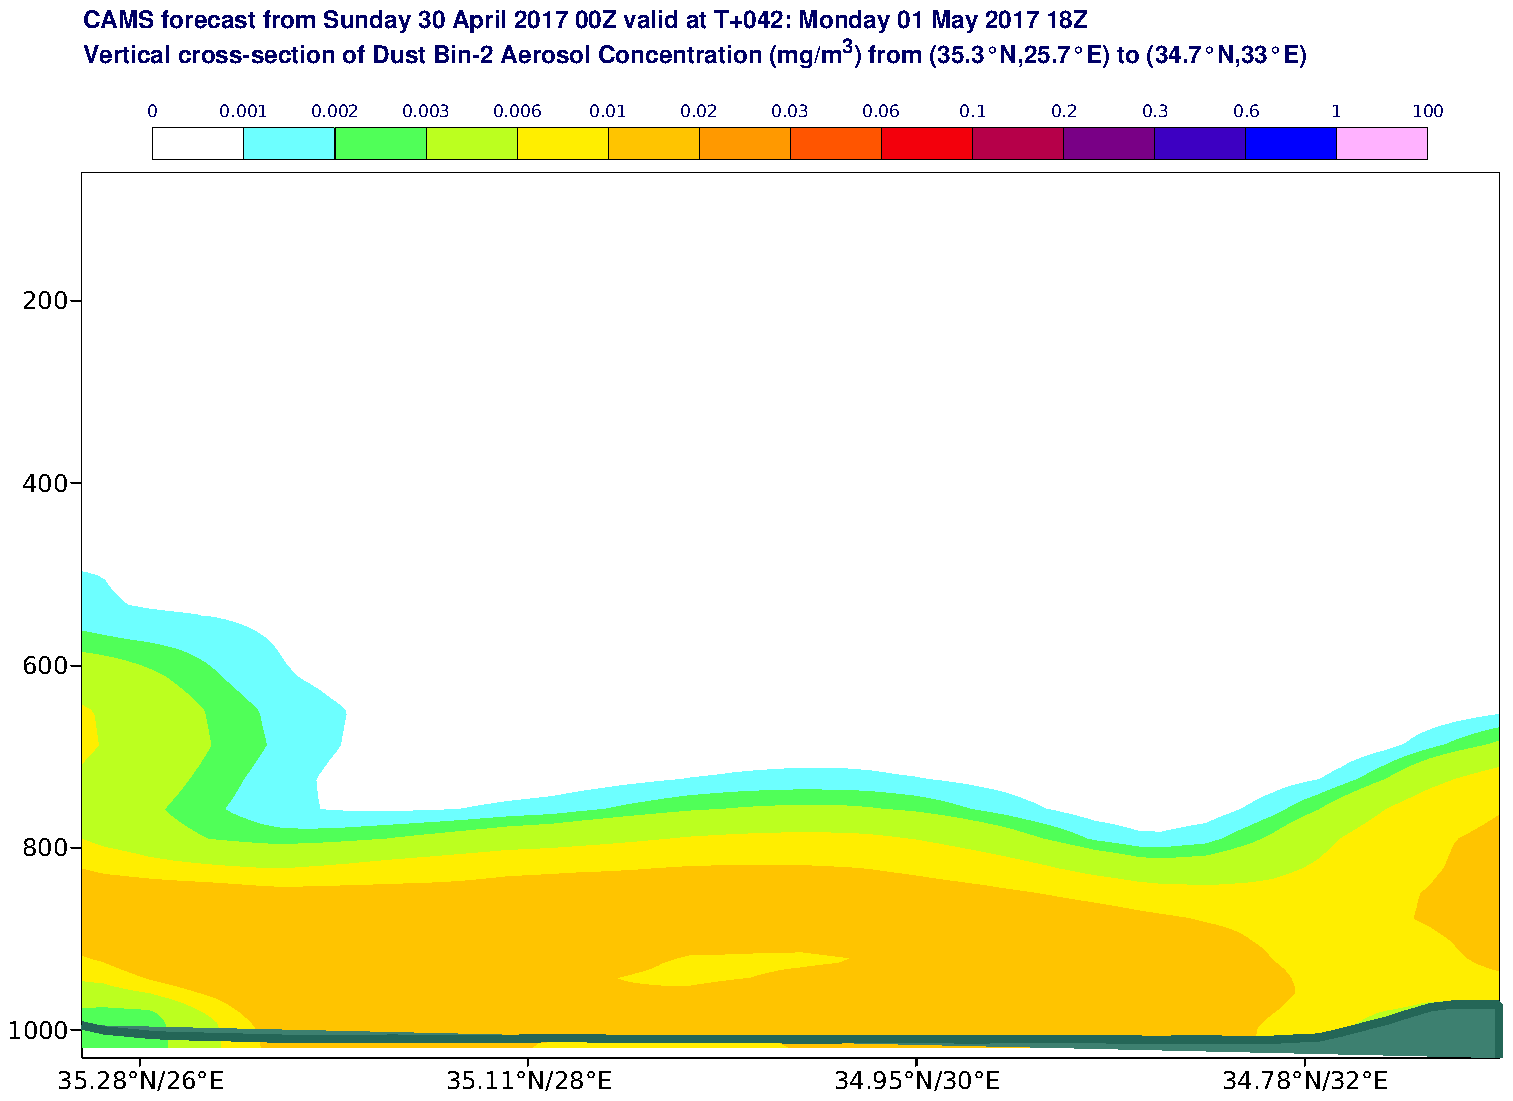 Vertical cross-section of Dust Bin-2 Aerosol Concentration (mg/m3) valid at T42 - 2017-05-01 18:00